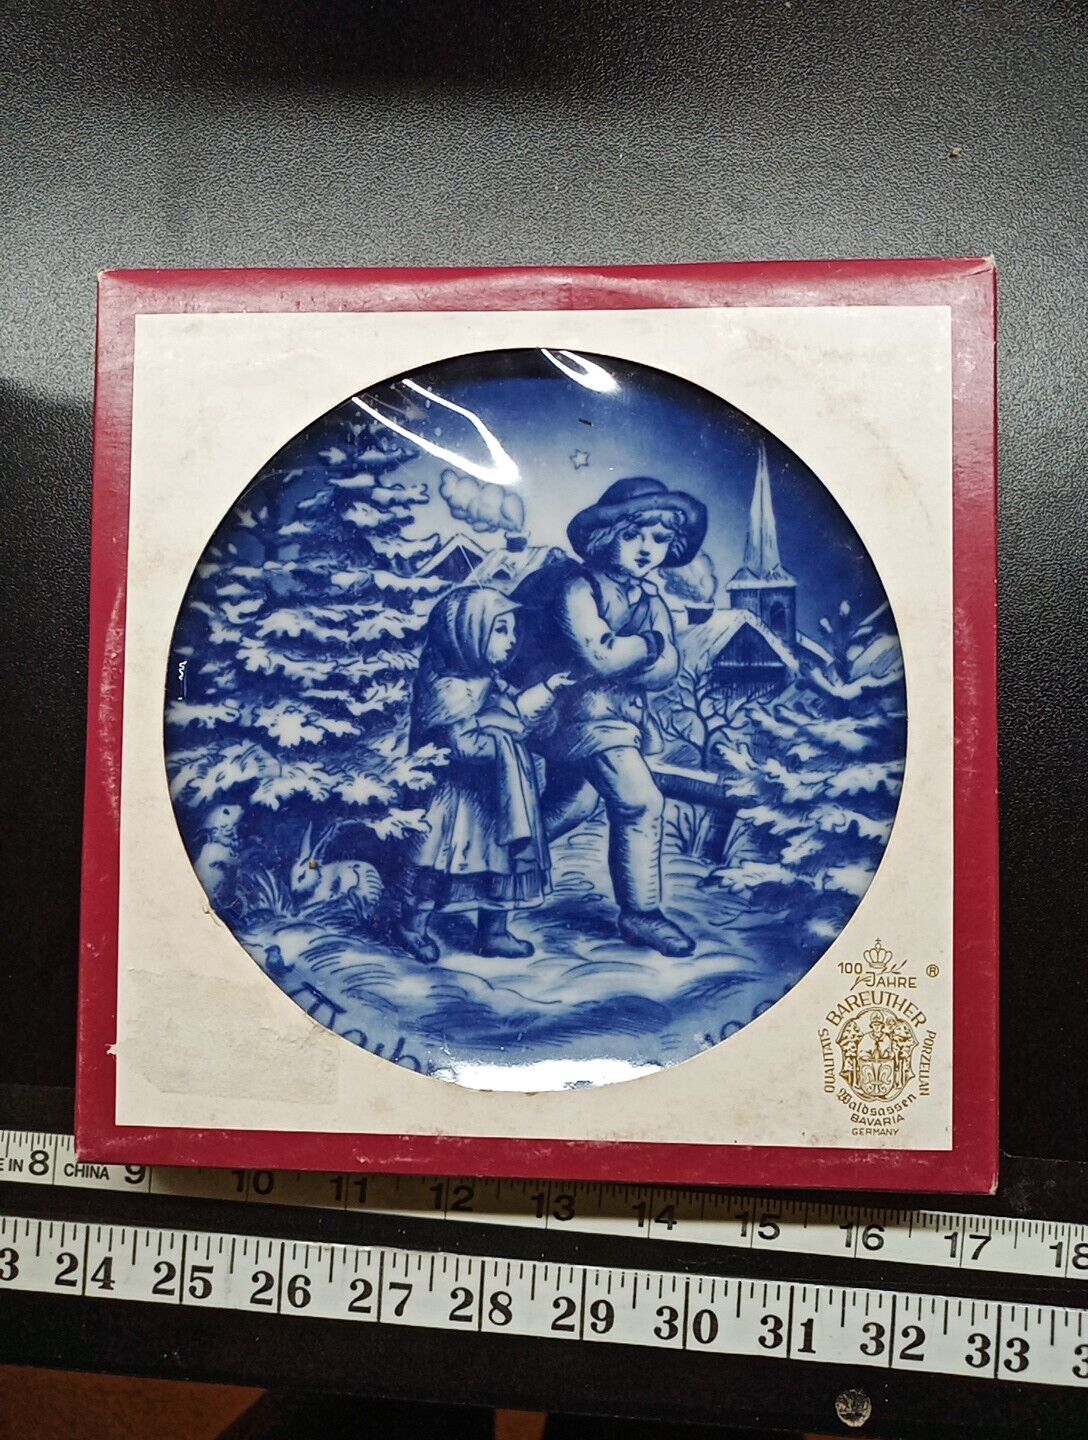 Weihnachten 1981 Porcelain Christmas Plate, BAREUTHER PORZELLAN, MADE IN GERMANY